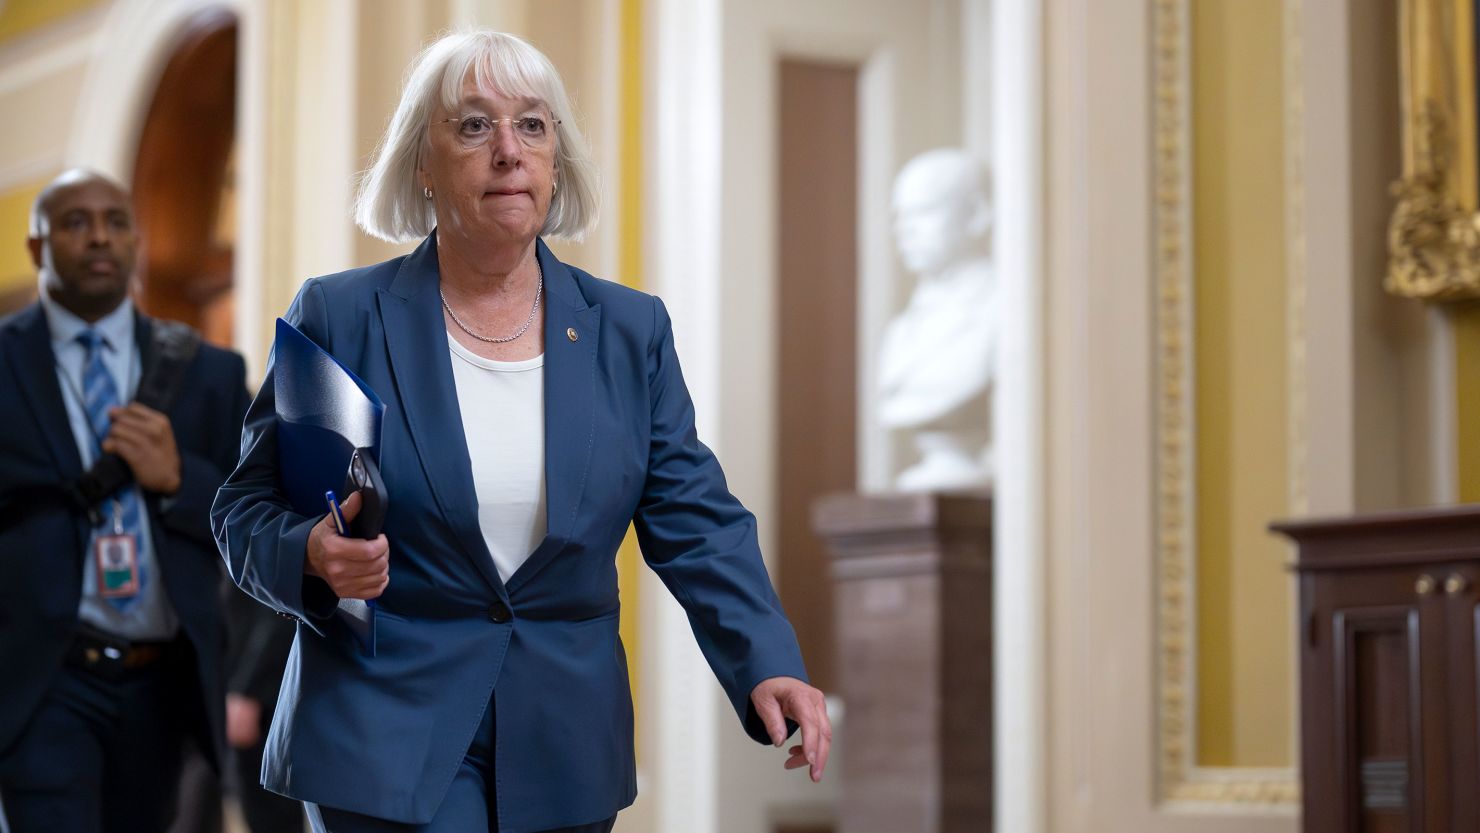 Senate Appropriations Committee Chair Patty Murray who also serves as the president pro tempore of the Senate, arrives to meet with the Senate Democratic Caucus, at the Capitol in Washington, DC, on June 13.